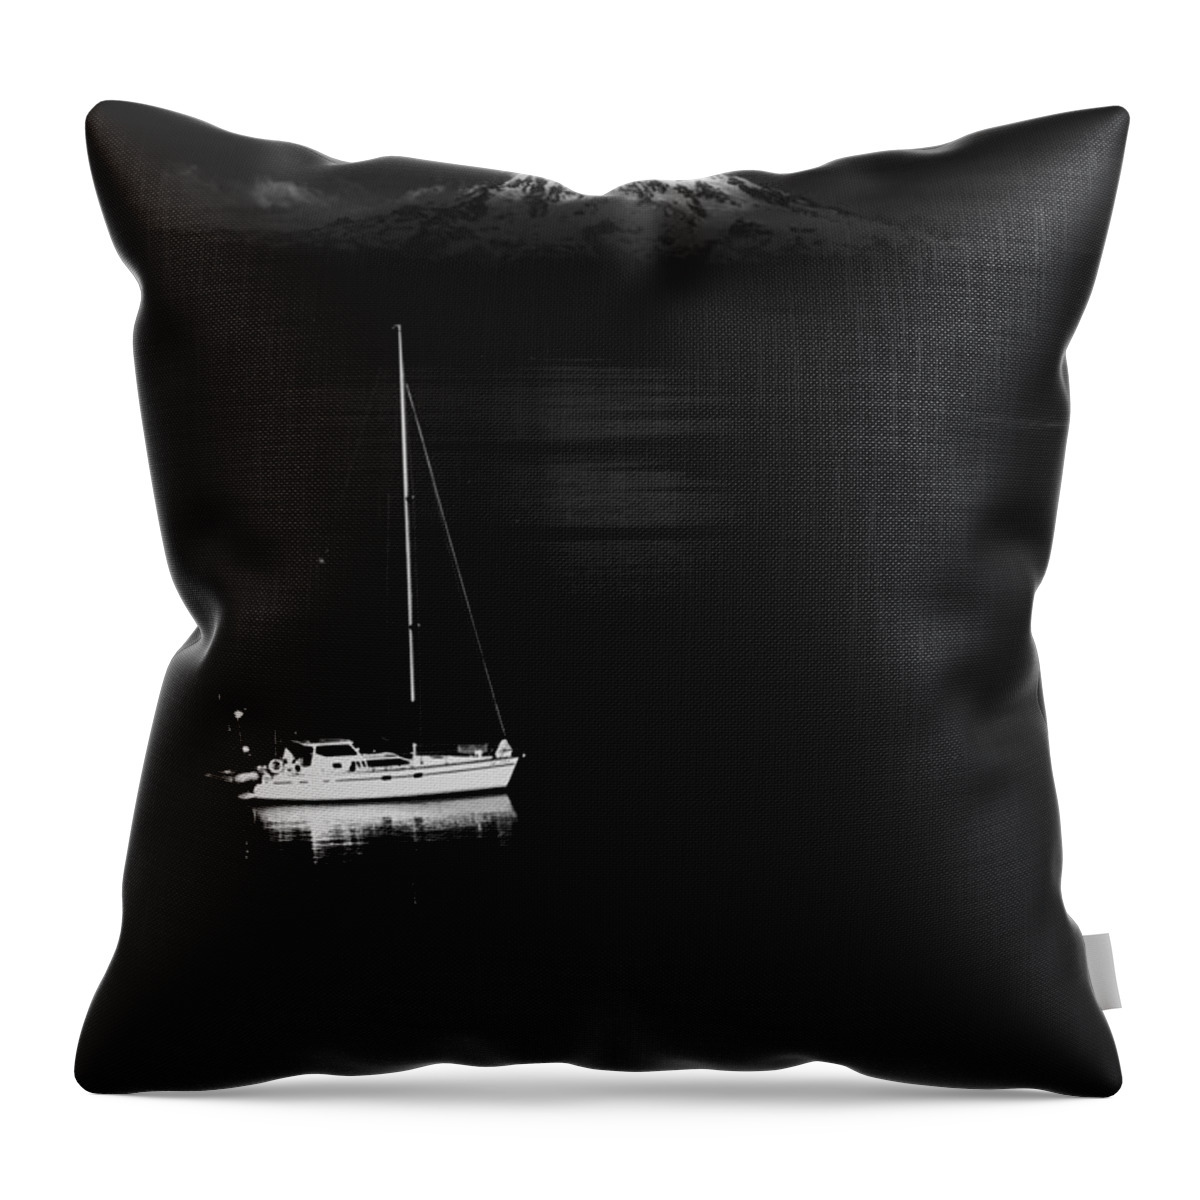 Gig Harbor Throw Pillow featuring the photograph Stark Sail by Benjamin Yeager